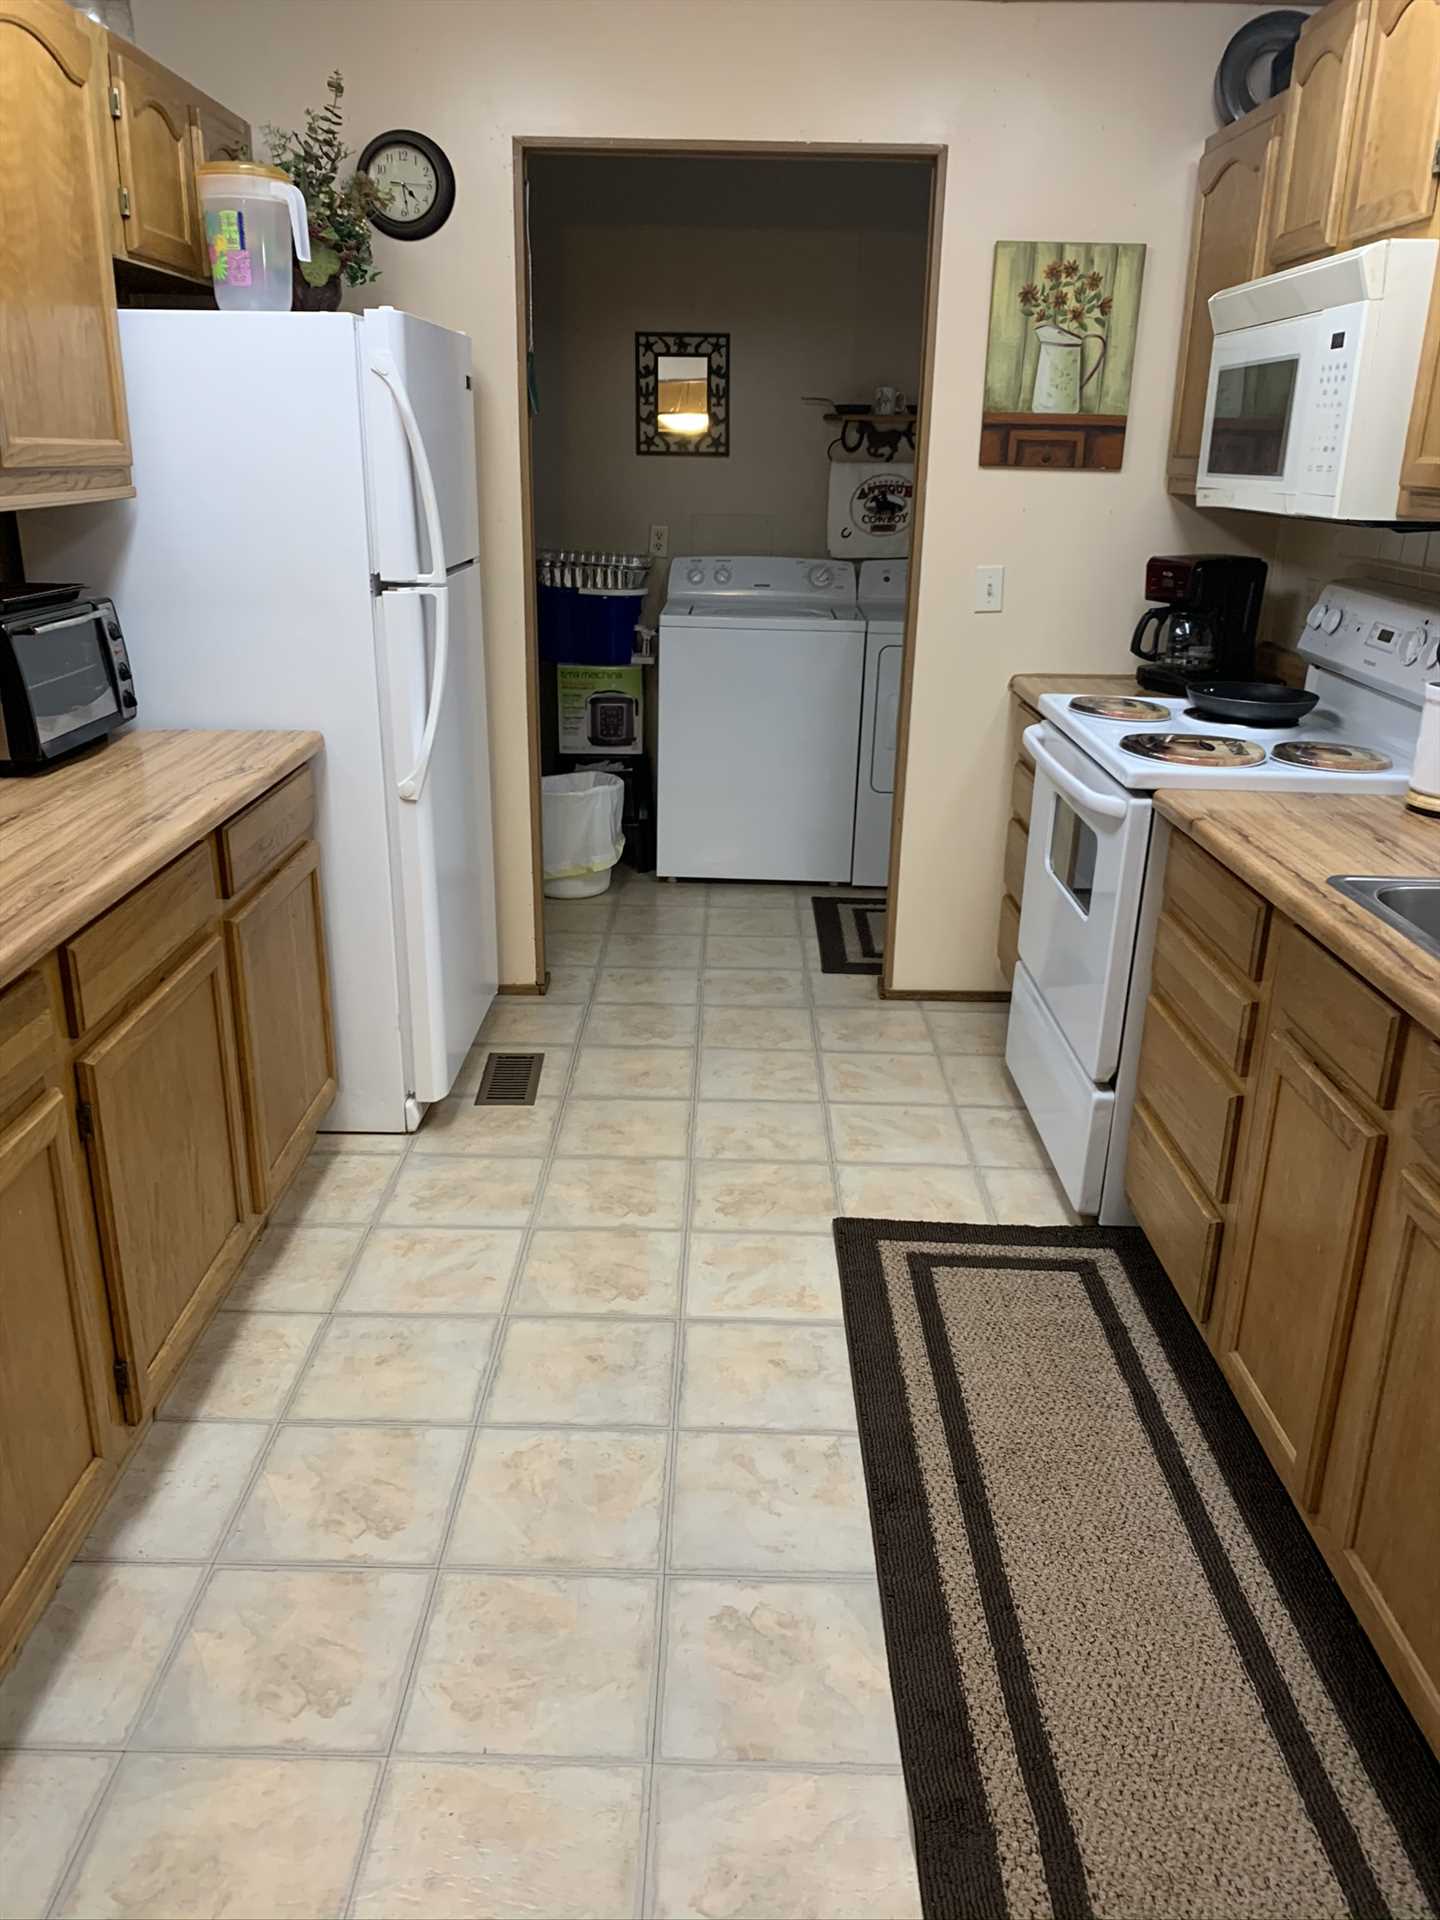                                                 Beyond the fully decked-out kitchen, you'll also find a convenient utility room, complete with a washer and dryer!